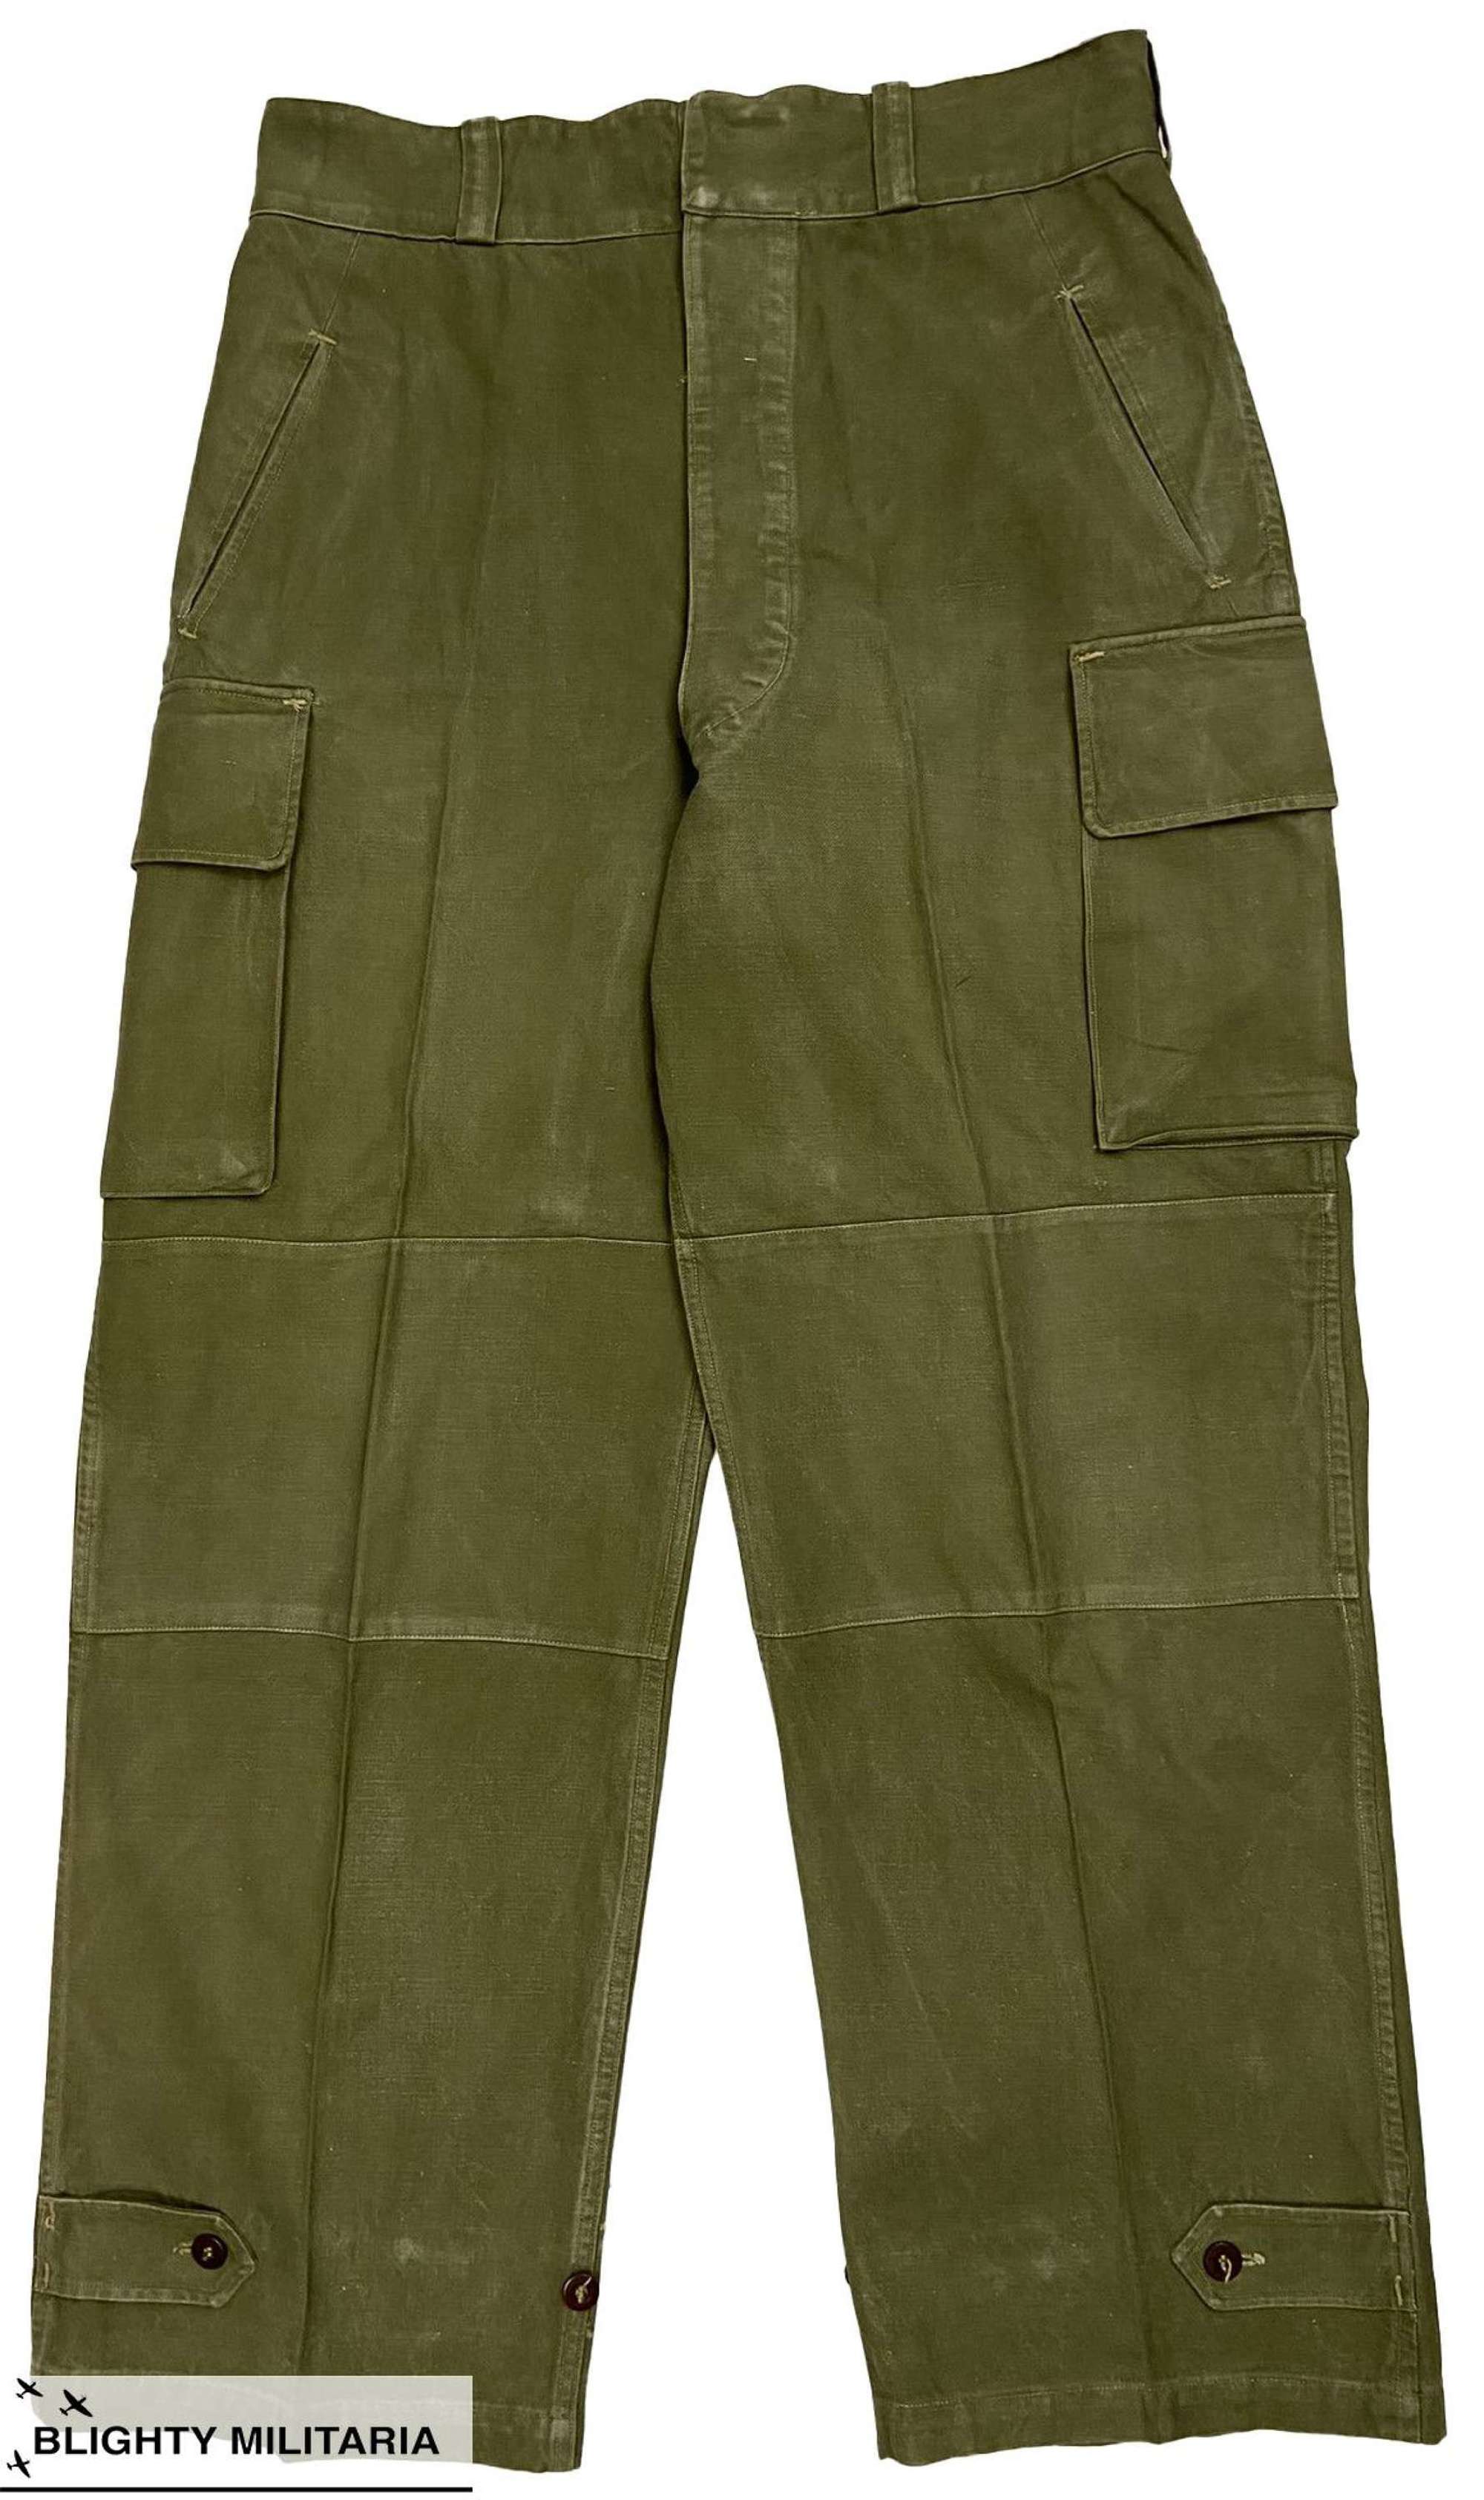 Original 1950s French Army M1947 Combat Trousers - Size 34 x 31